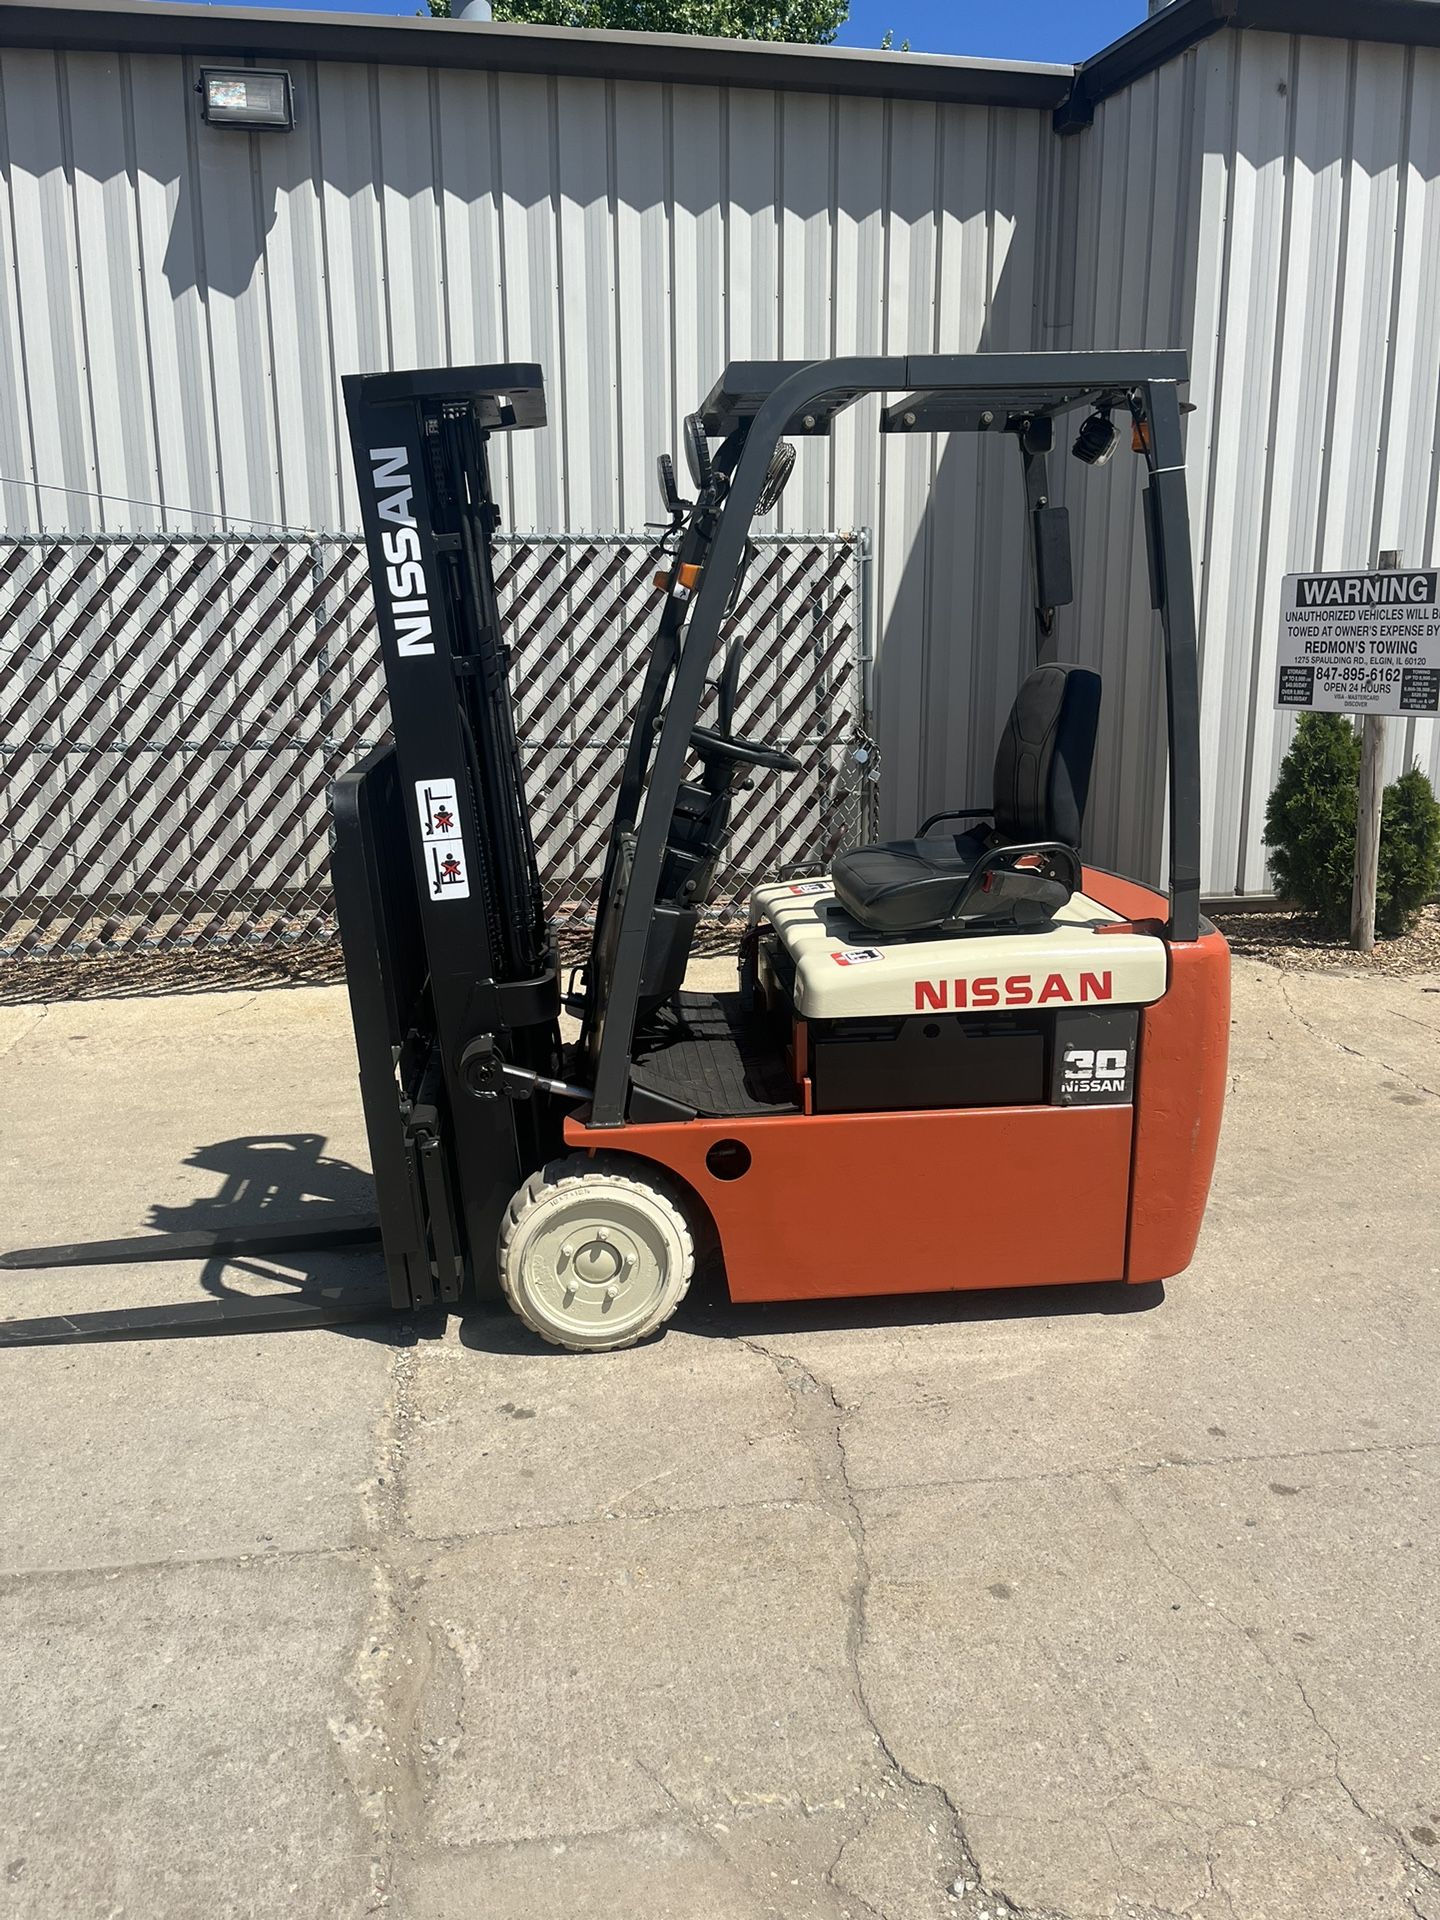 FOR SALE A NISSAN TN01L15HV FORKLIFT.83/188 FF TSU MAST W/SIDESHIFT,OHG,P/S,  RECONDITIONED 48V BATTERY WITH WARRANTY. IT IS IN GOOD WORKING CONDITION